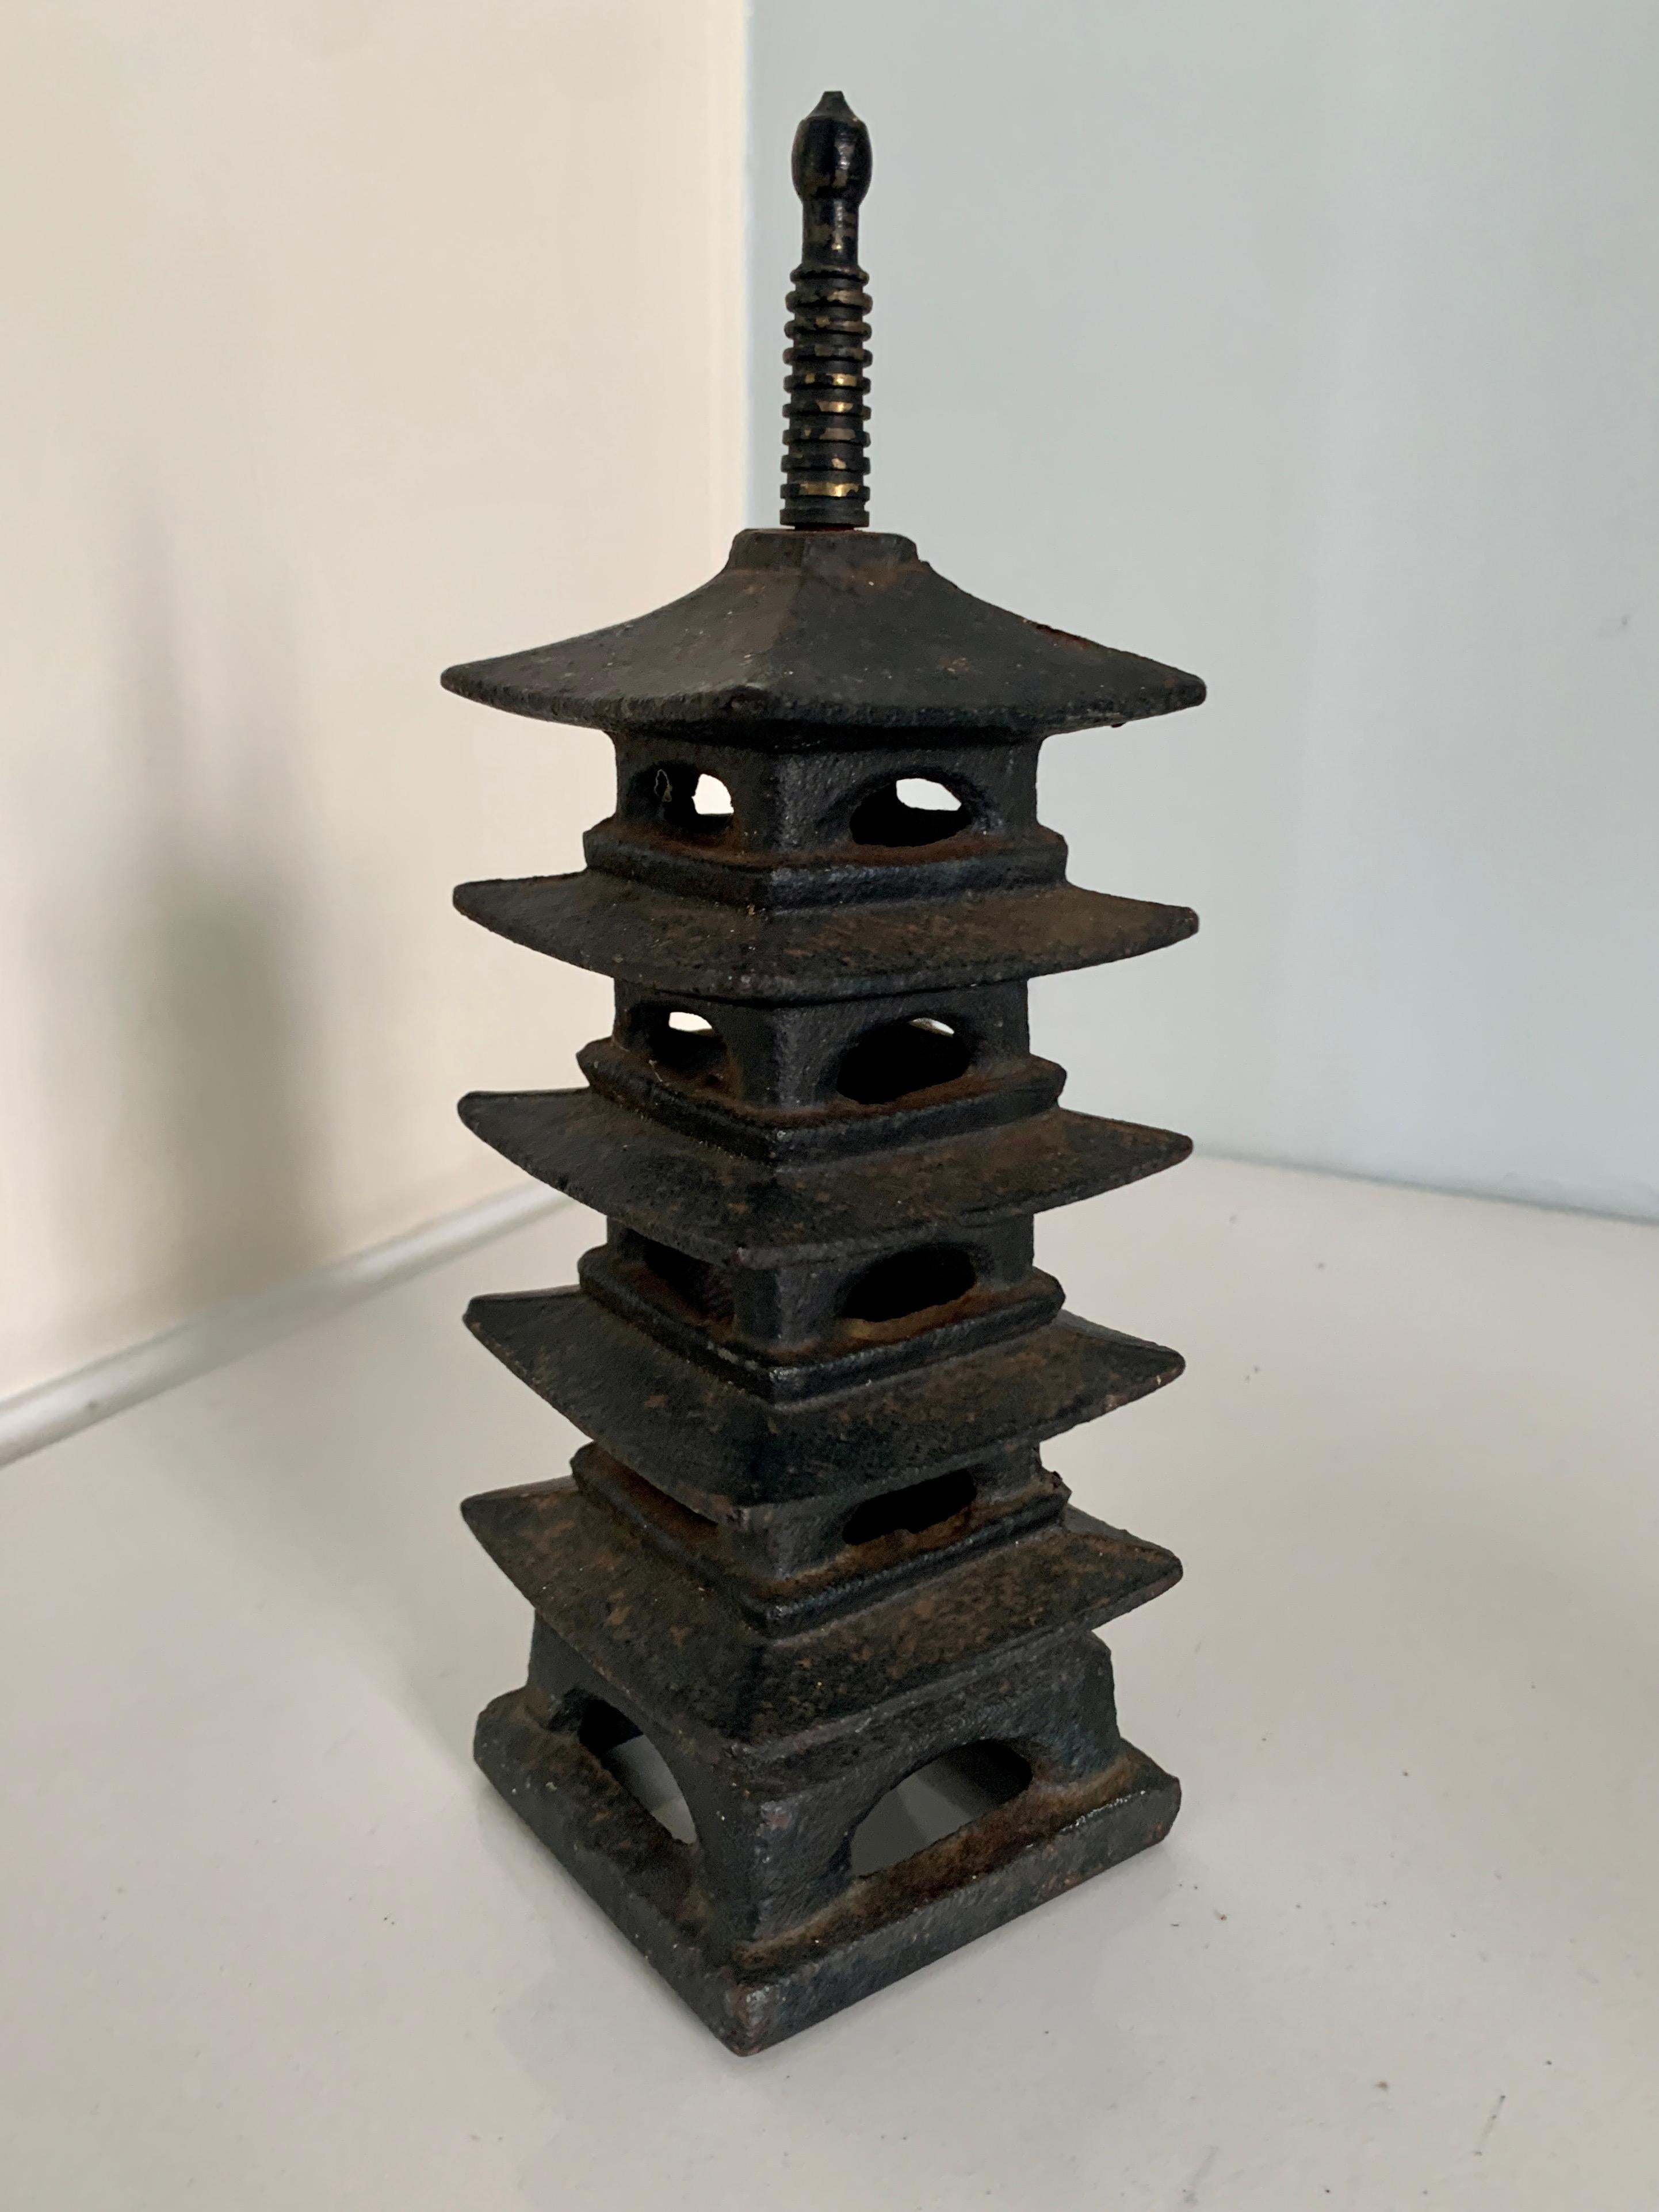 A wonderful and heavy cast iron Pagoda censer. lovely for burning incense, a small, yet quiet statement piece - A compliment to any shelf or console and also a nice addition to any garden table. See images as we have placed Both a tea light and a